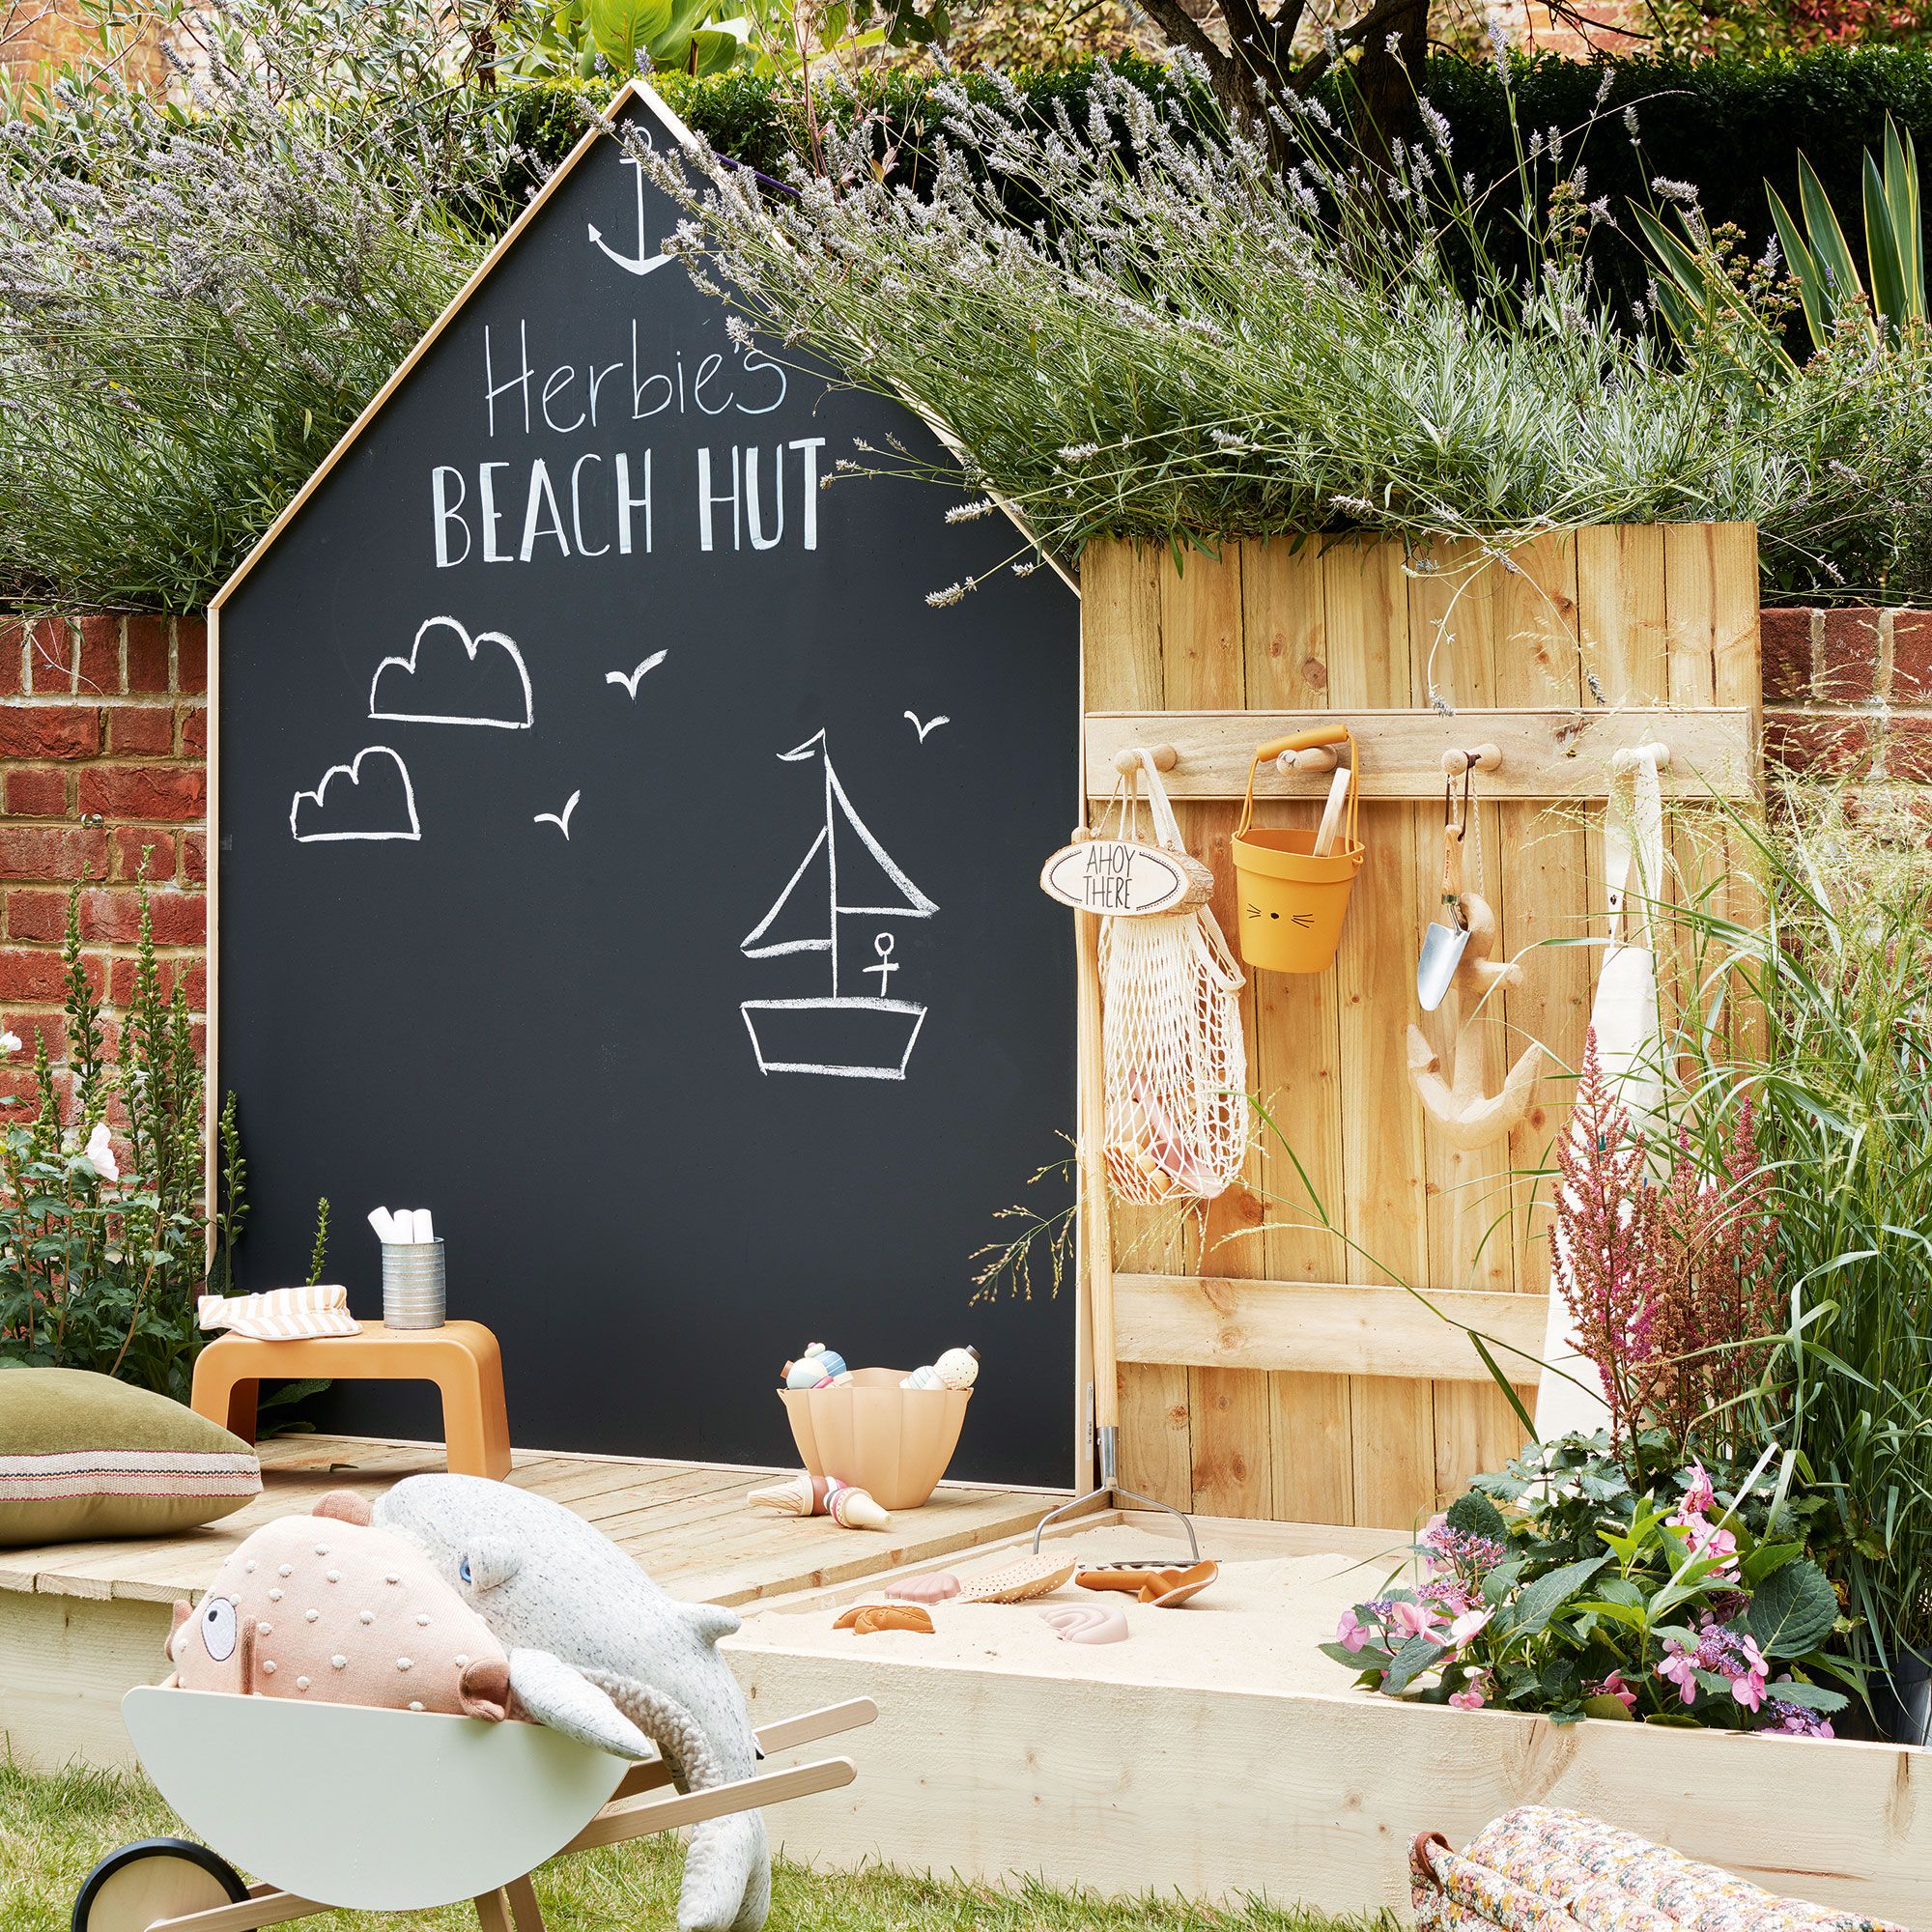 Fun and Creative Patio Ideas for Kids